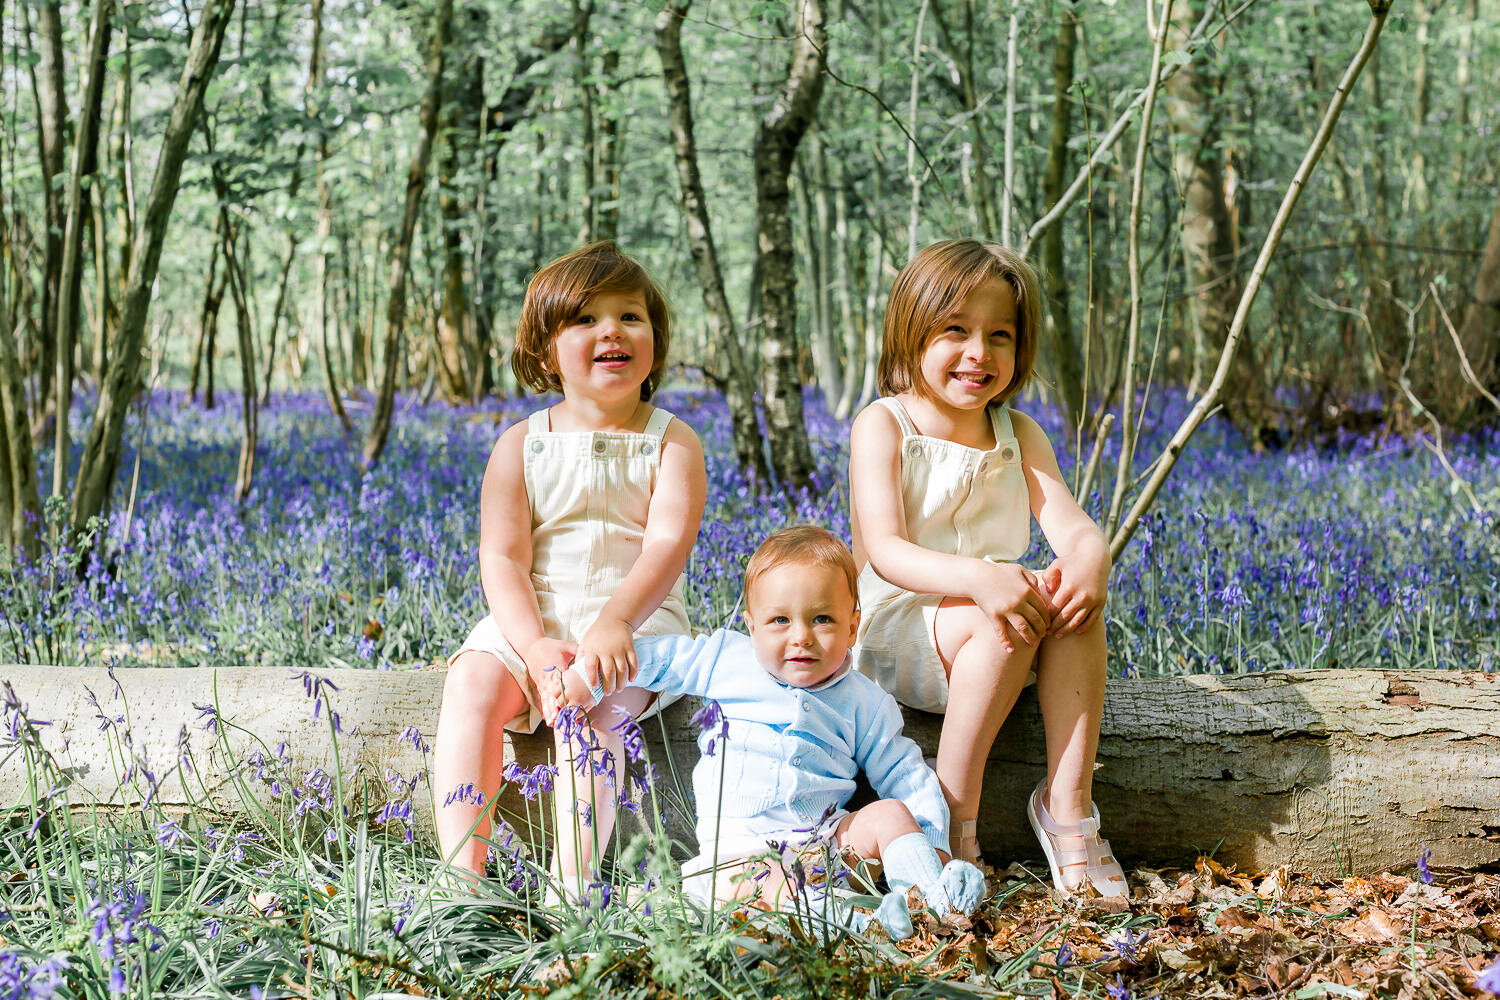 Iris_and_Ivy_photography_family_bluebell_shoot.1.jpg